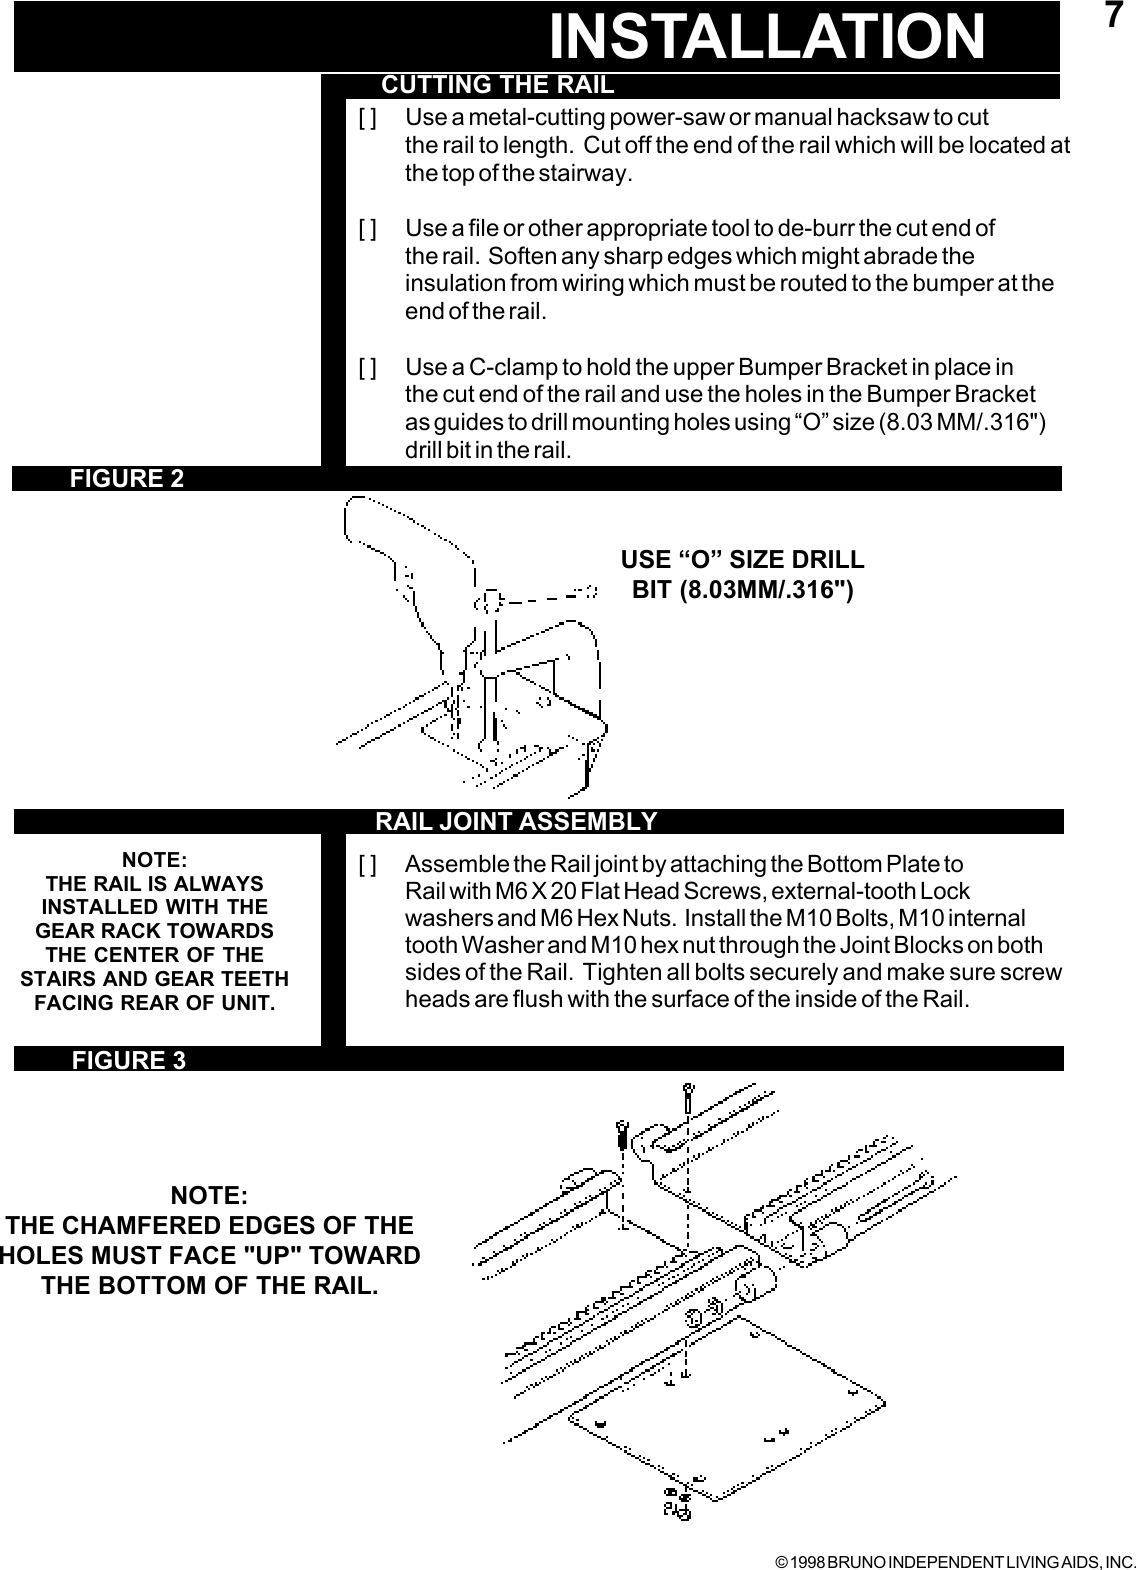 © 1998 BRUNO INDEPENDENT LIVING AIDS, INC.7INSTALLATIONCUTTING THE RAIL[ ] Use a metal-cutting power-saw or manual hacksaw to cutthe rail to length.  Cut off the end of the rail which will be located atthe top of the stairway.[ ] Use a file or other appropriate tool to de-burr the cut end ofthe rail.  Soften any sharp edges which might abrade theinsulation from wiring which must be routed to the bumper at theend of the rail.[ ] Use a C-clamp to hold the upper Bumper Bracket in place inthe cut end of the rail and use the holes in the Bumper Bracketas guides to drill mounting holes using “O” size (8.03 MM/.316&quot;)drill bit in the rail.[ ] Assemble the Rail joint by attaching the Bottom Plate toRail with M6 X 20 Flat Head Screws, external-tooth Lockwashers and M6 Hex Nuts.  Install the M10 Bolts, M10 internaltooth Washer and M10 hex nut through the Joint Blocks on bothsides of the Rail.  Tighten all bolts securely and make sure screwheads are flush with the surface of the inside of the Rail.NOTE:THE CHAMFERED EDGES OF THEHOLES MUST FACE &quot;UP&quot; TOWARDTHE BOTTOM OF THE RAIL.FIGURE 2FIGURE 3NOTE:THE RAIL IS ALWAYSINSTALLED WITH THEGEAR RACK TOWARDSTHE CENTER OF THESTAIRS AND GEAR TEETHFACING REAR OF UNIT.RAIL JOINT ASSEMBLYUSE “O” SIZE DRILLBIT (8.03MM/.316&quot;)